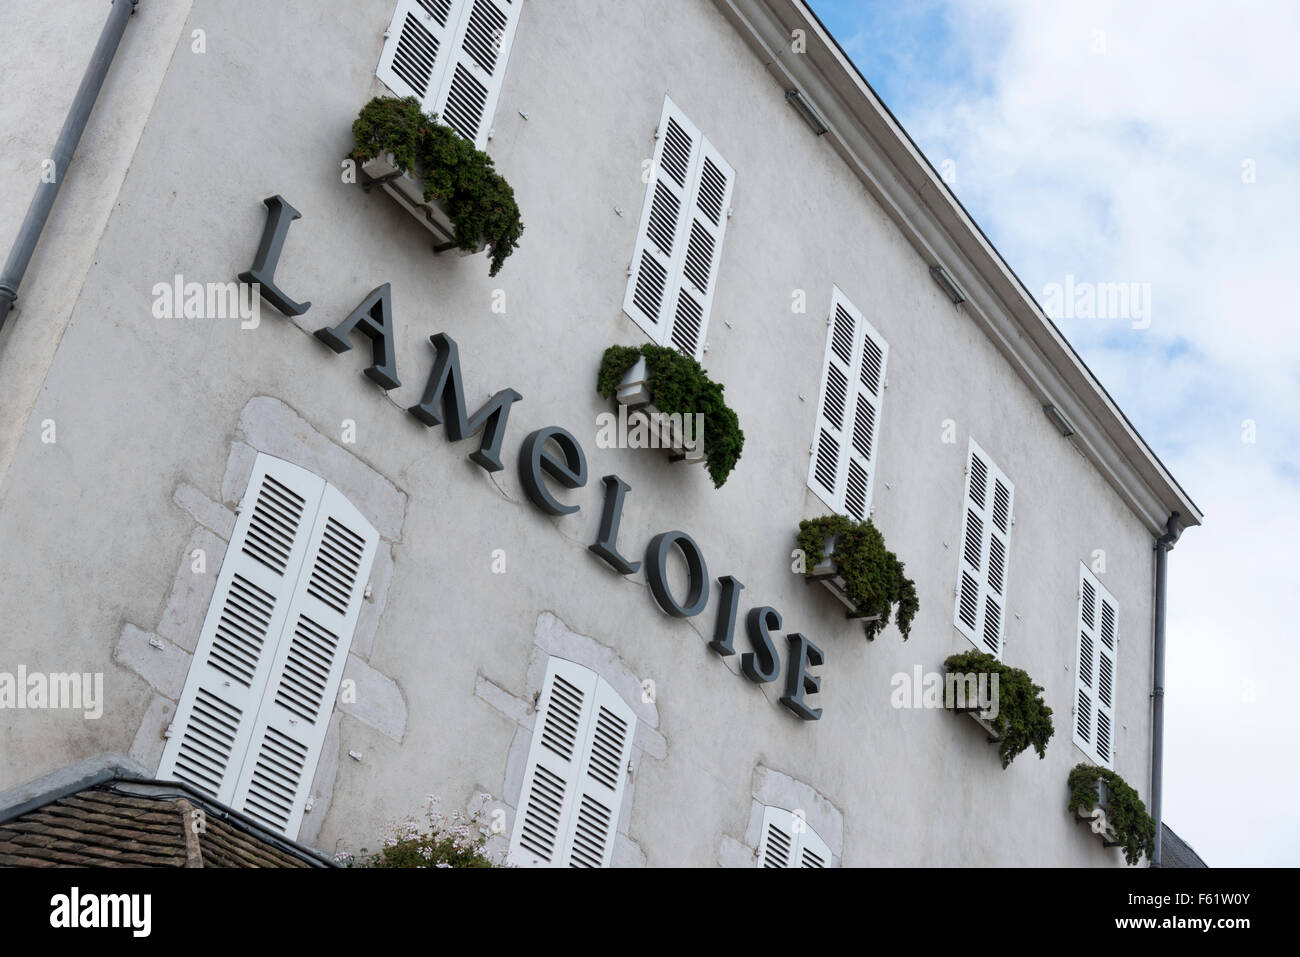 A sign on the Lameloise hotel and restaurant in Chagny France Stock Photo